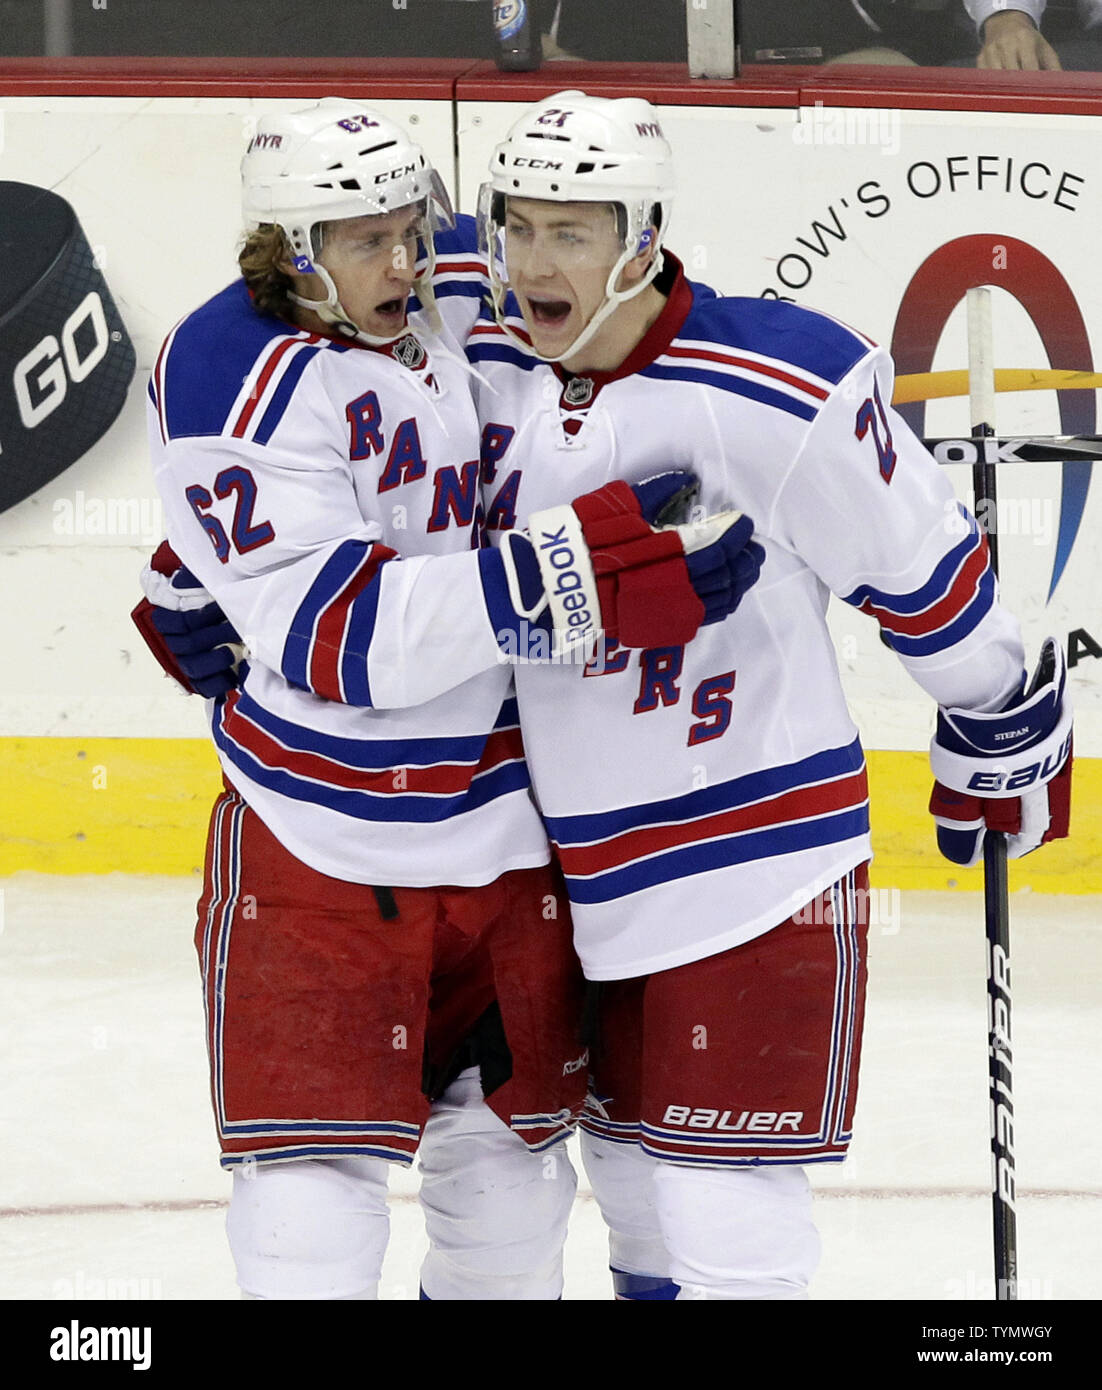 New York Rangers Derek Stepan reacts with Carl Hagelin after scoring a goal in the second period against the New Jersey Devils at the Prudential Center in Newark, New Jersey on March 6, 2012.   UPI/John Angelillo Stock Photo